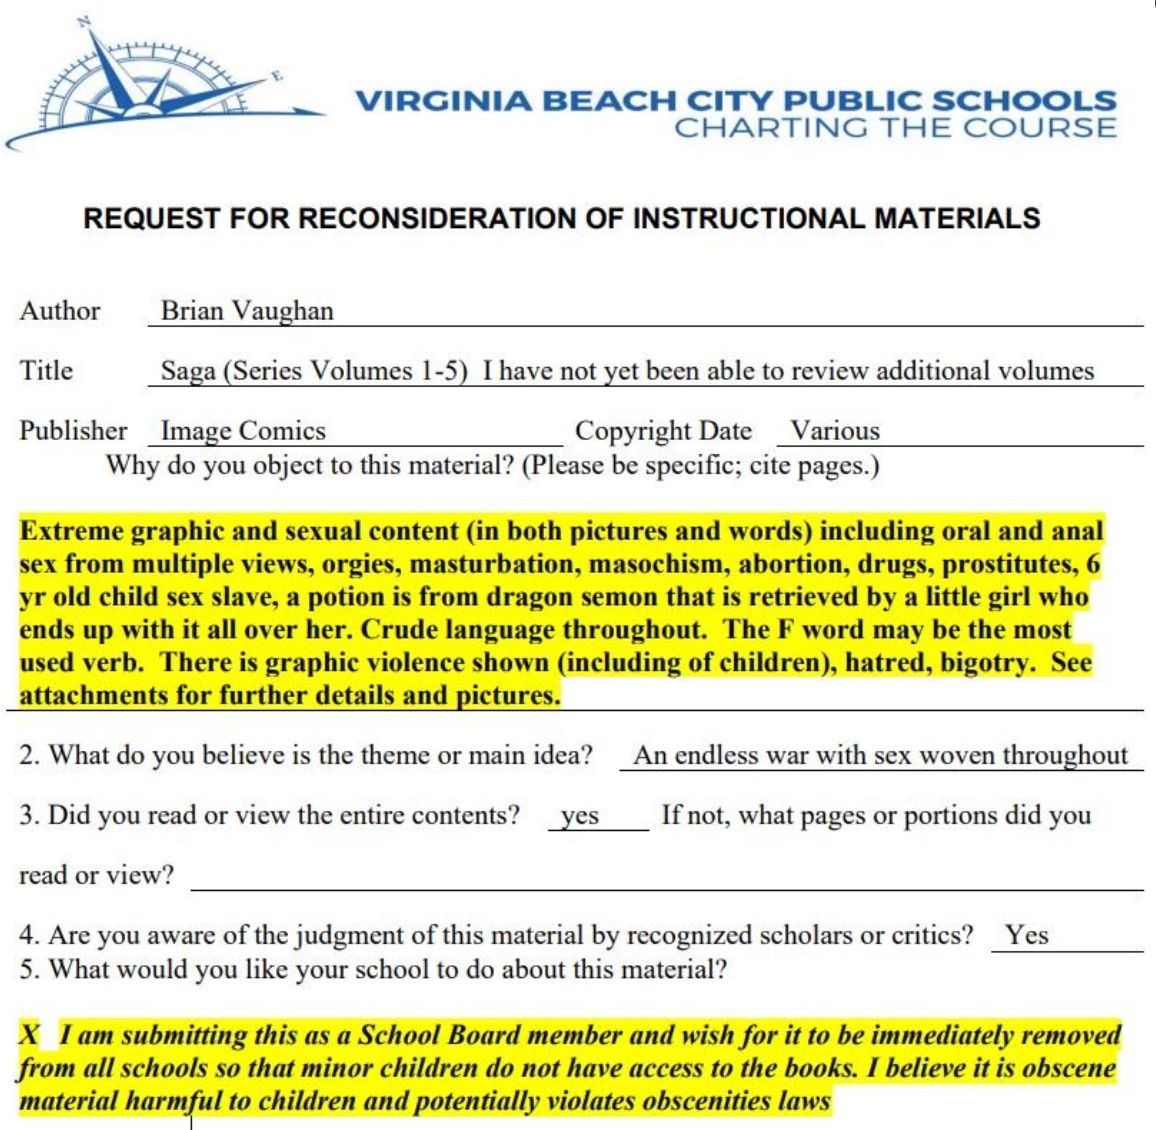 Image of formal complaint from VA Beach school board member about SAGA. 